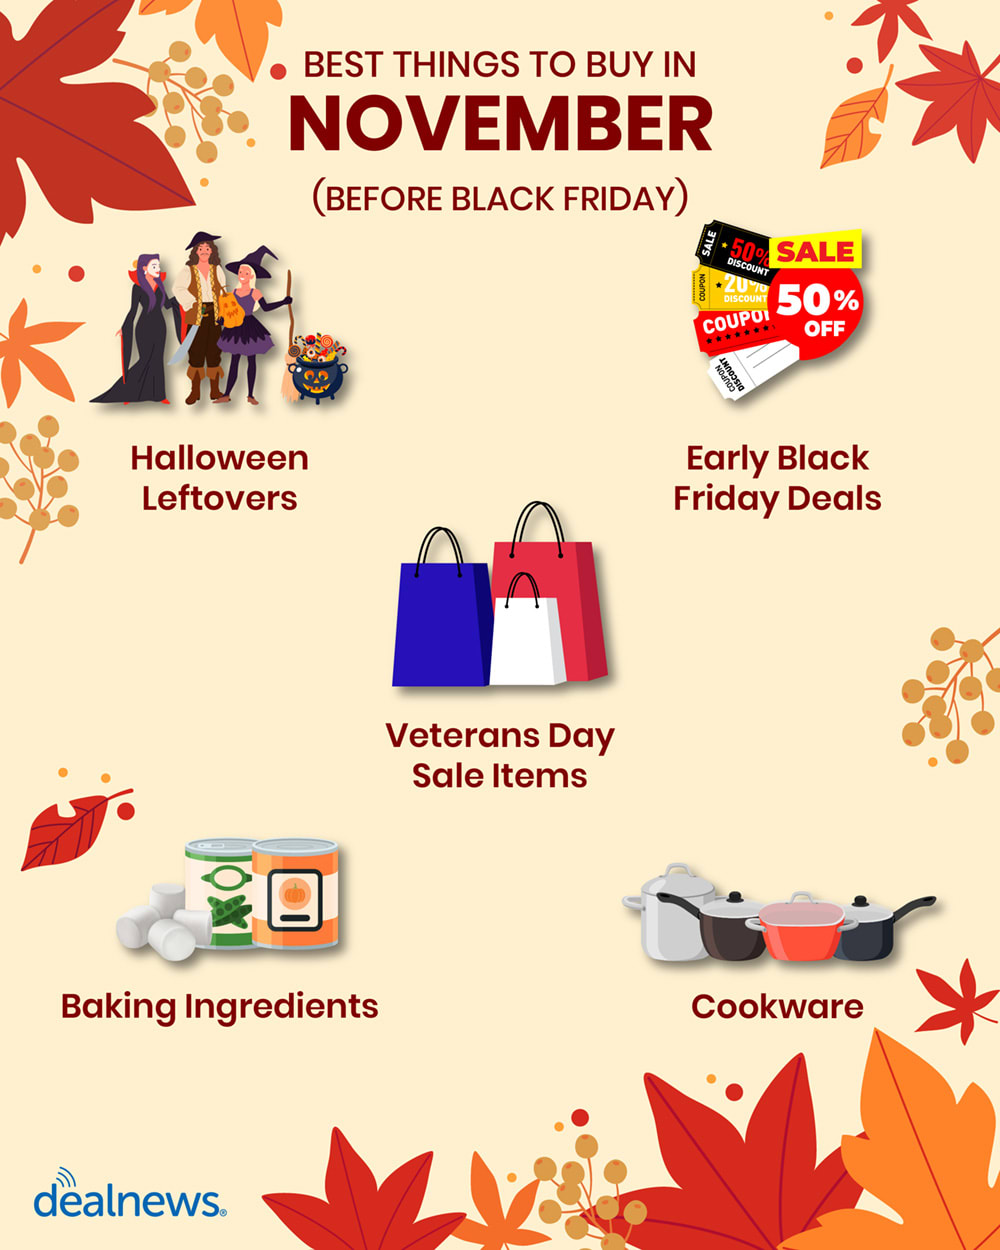 Five of the best things to buy in early November are shown in infographic.